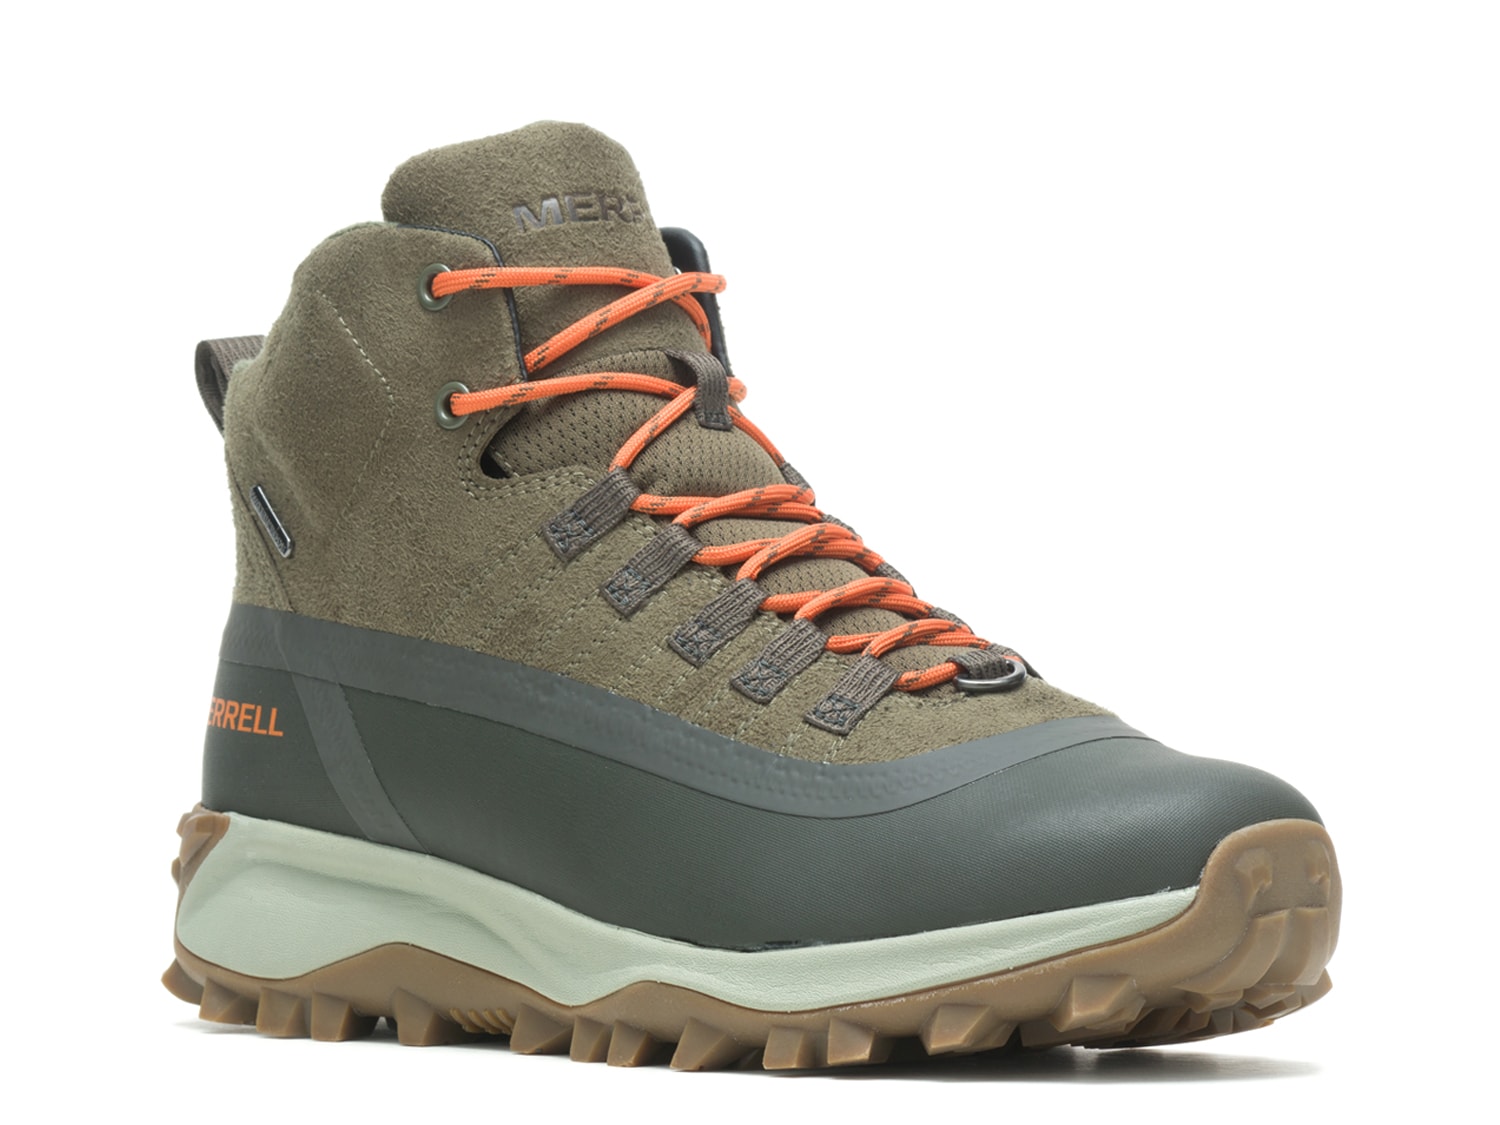 Merrell Thermo Snowdrift Hiking Boot - Men's - Free Shipping | DSW